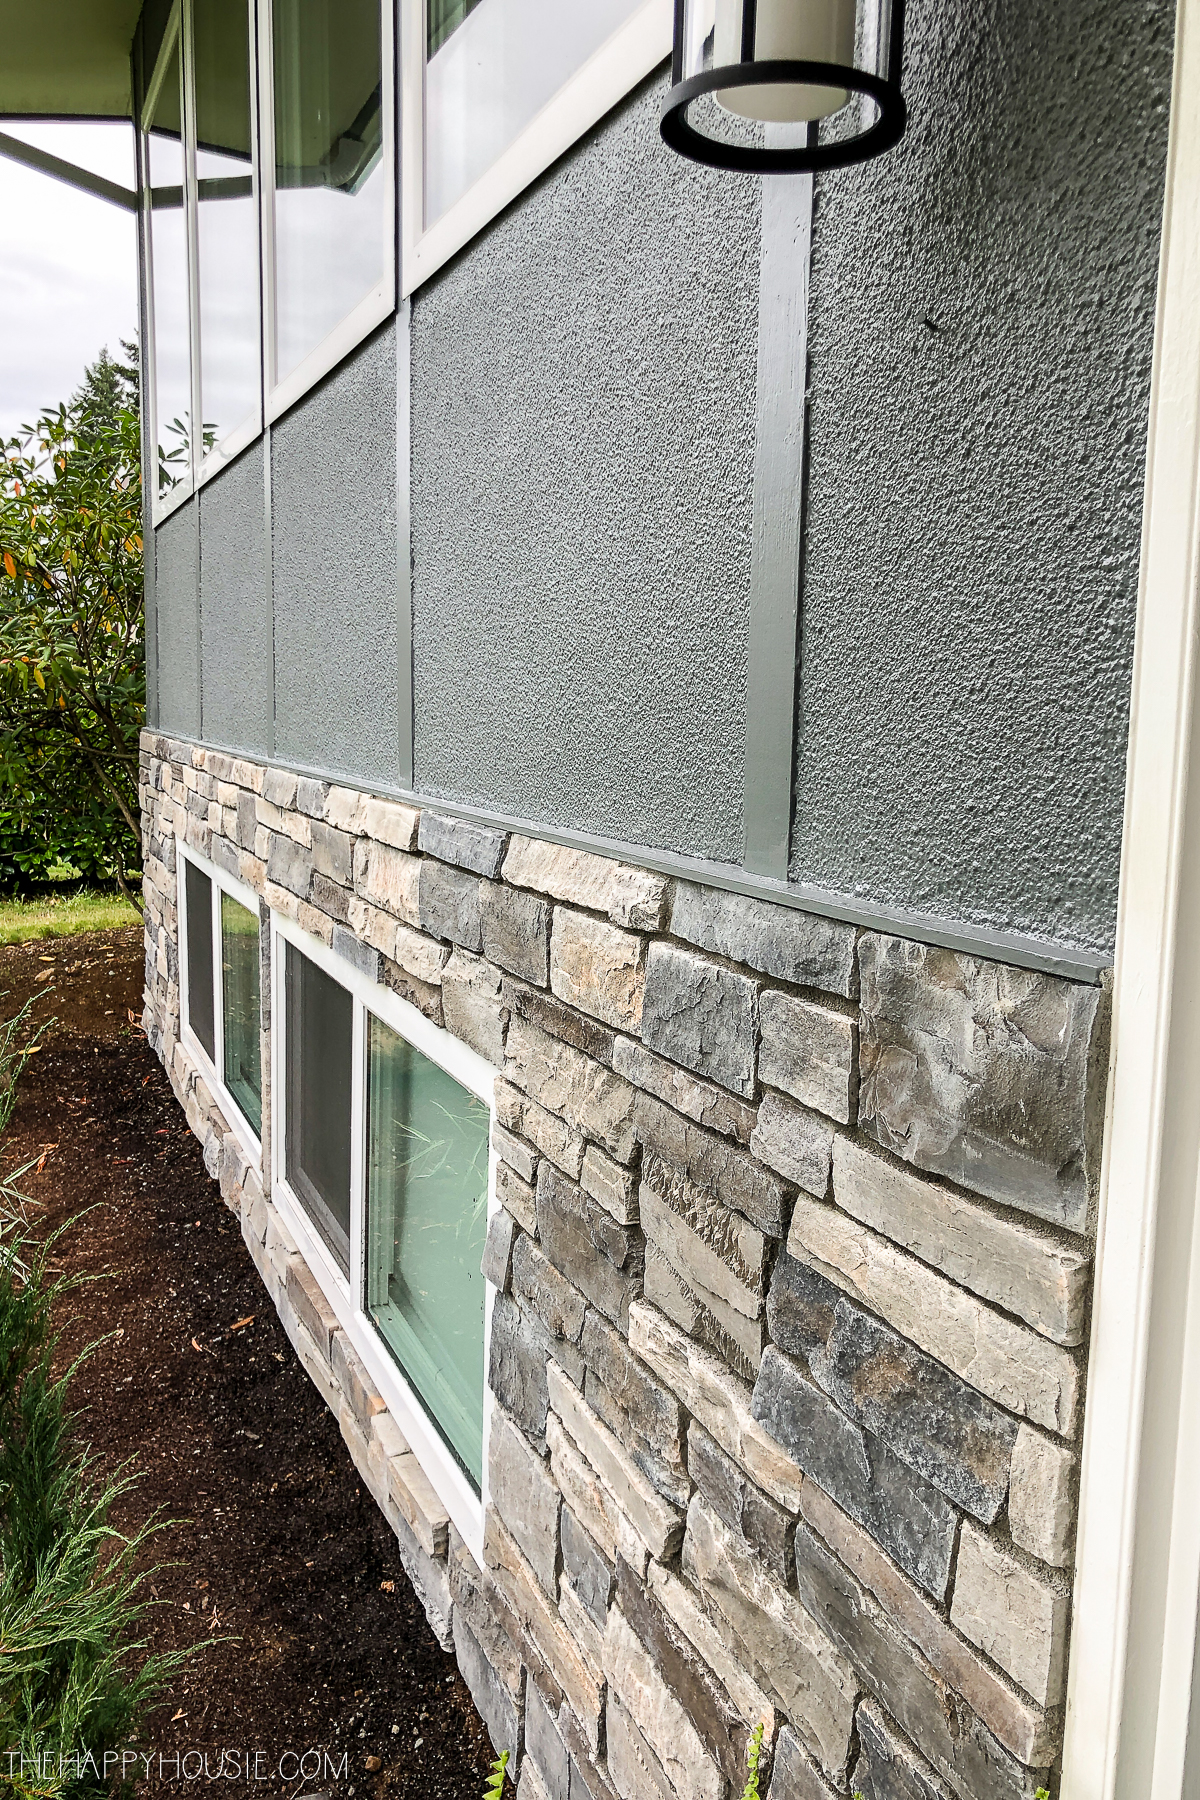 Cultured stone on the bottom portion of the house.